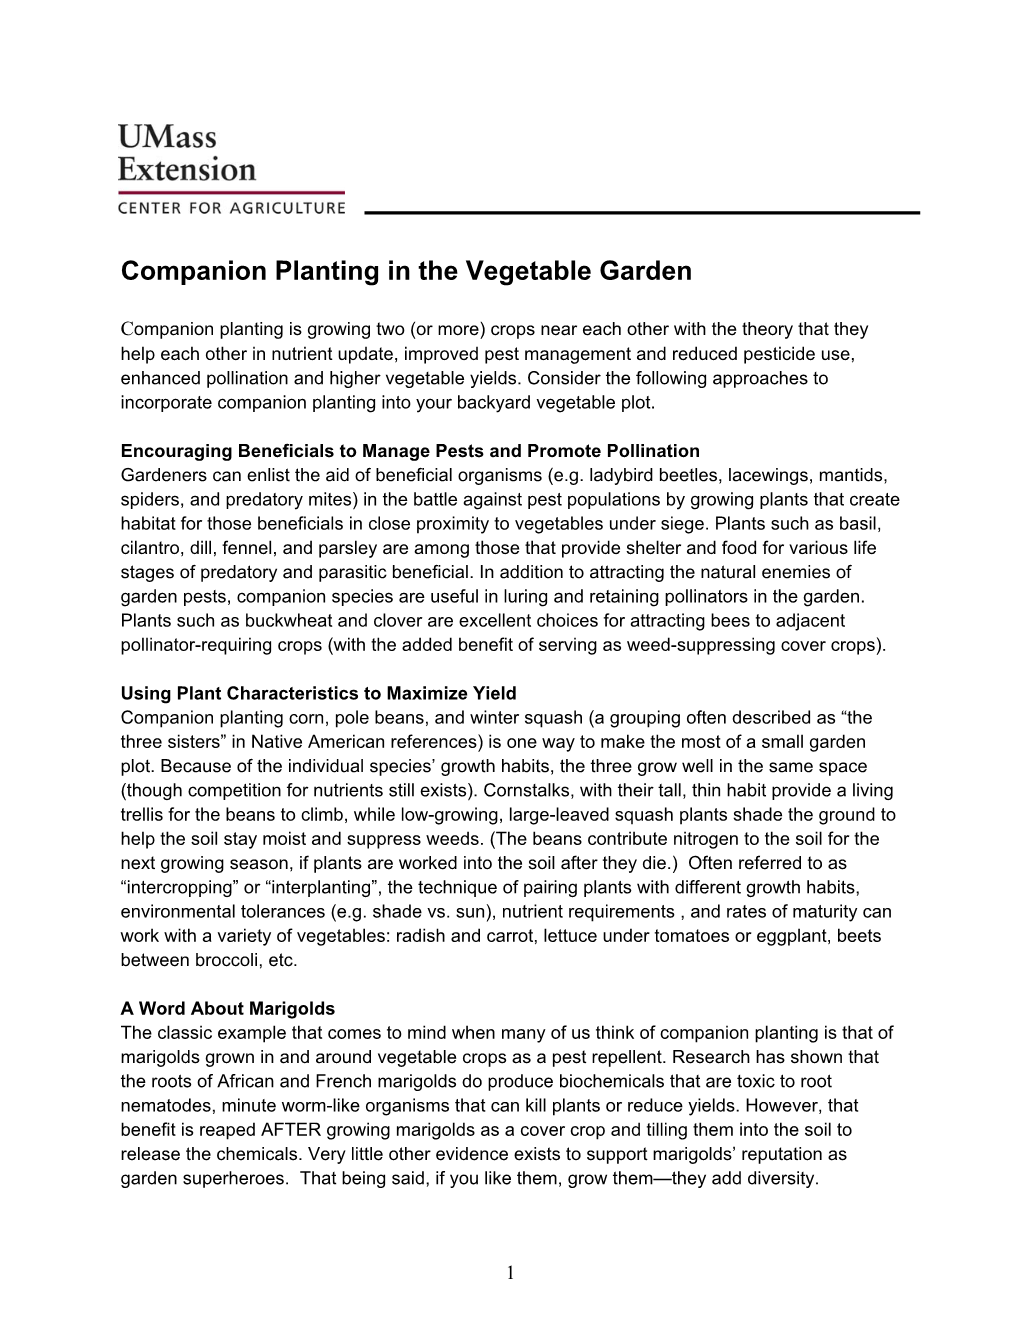 Companion Planting in the Vegetable Garden